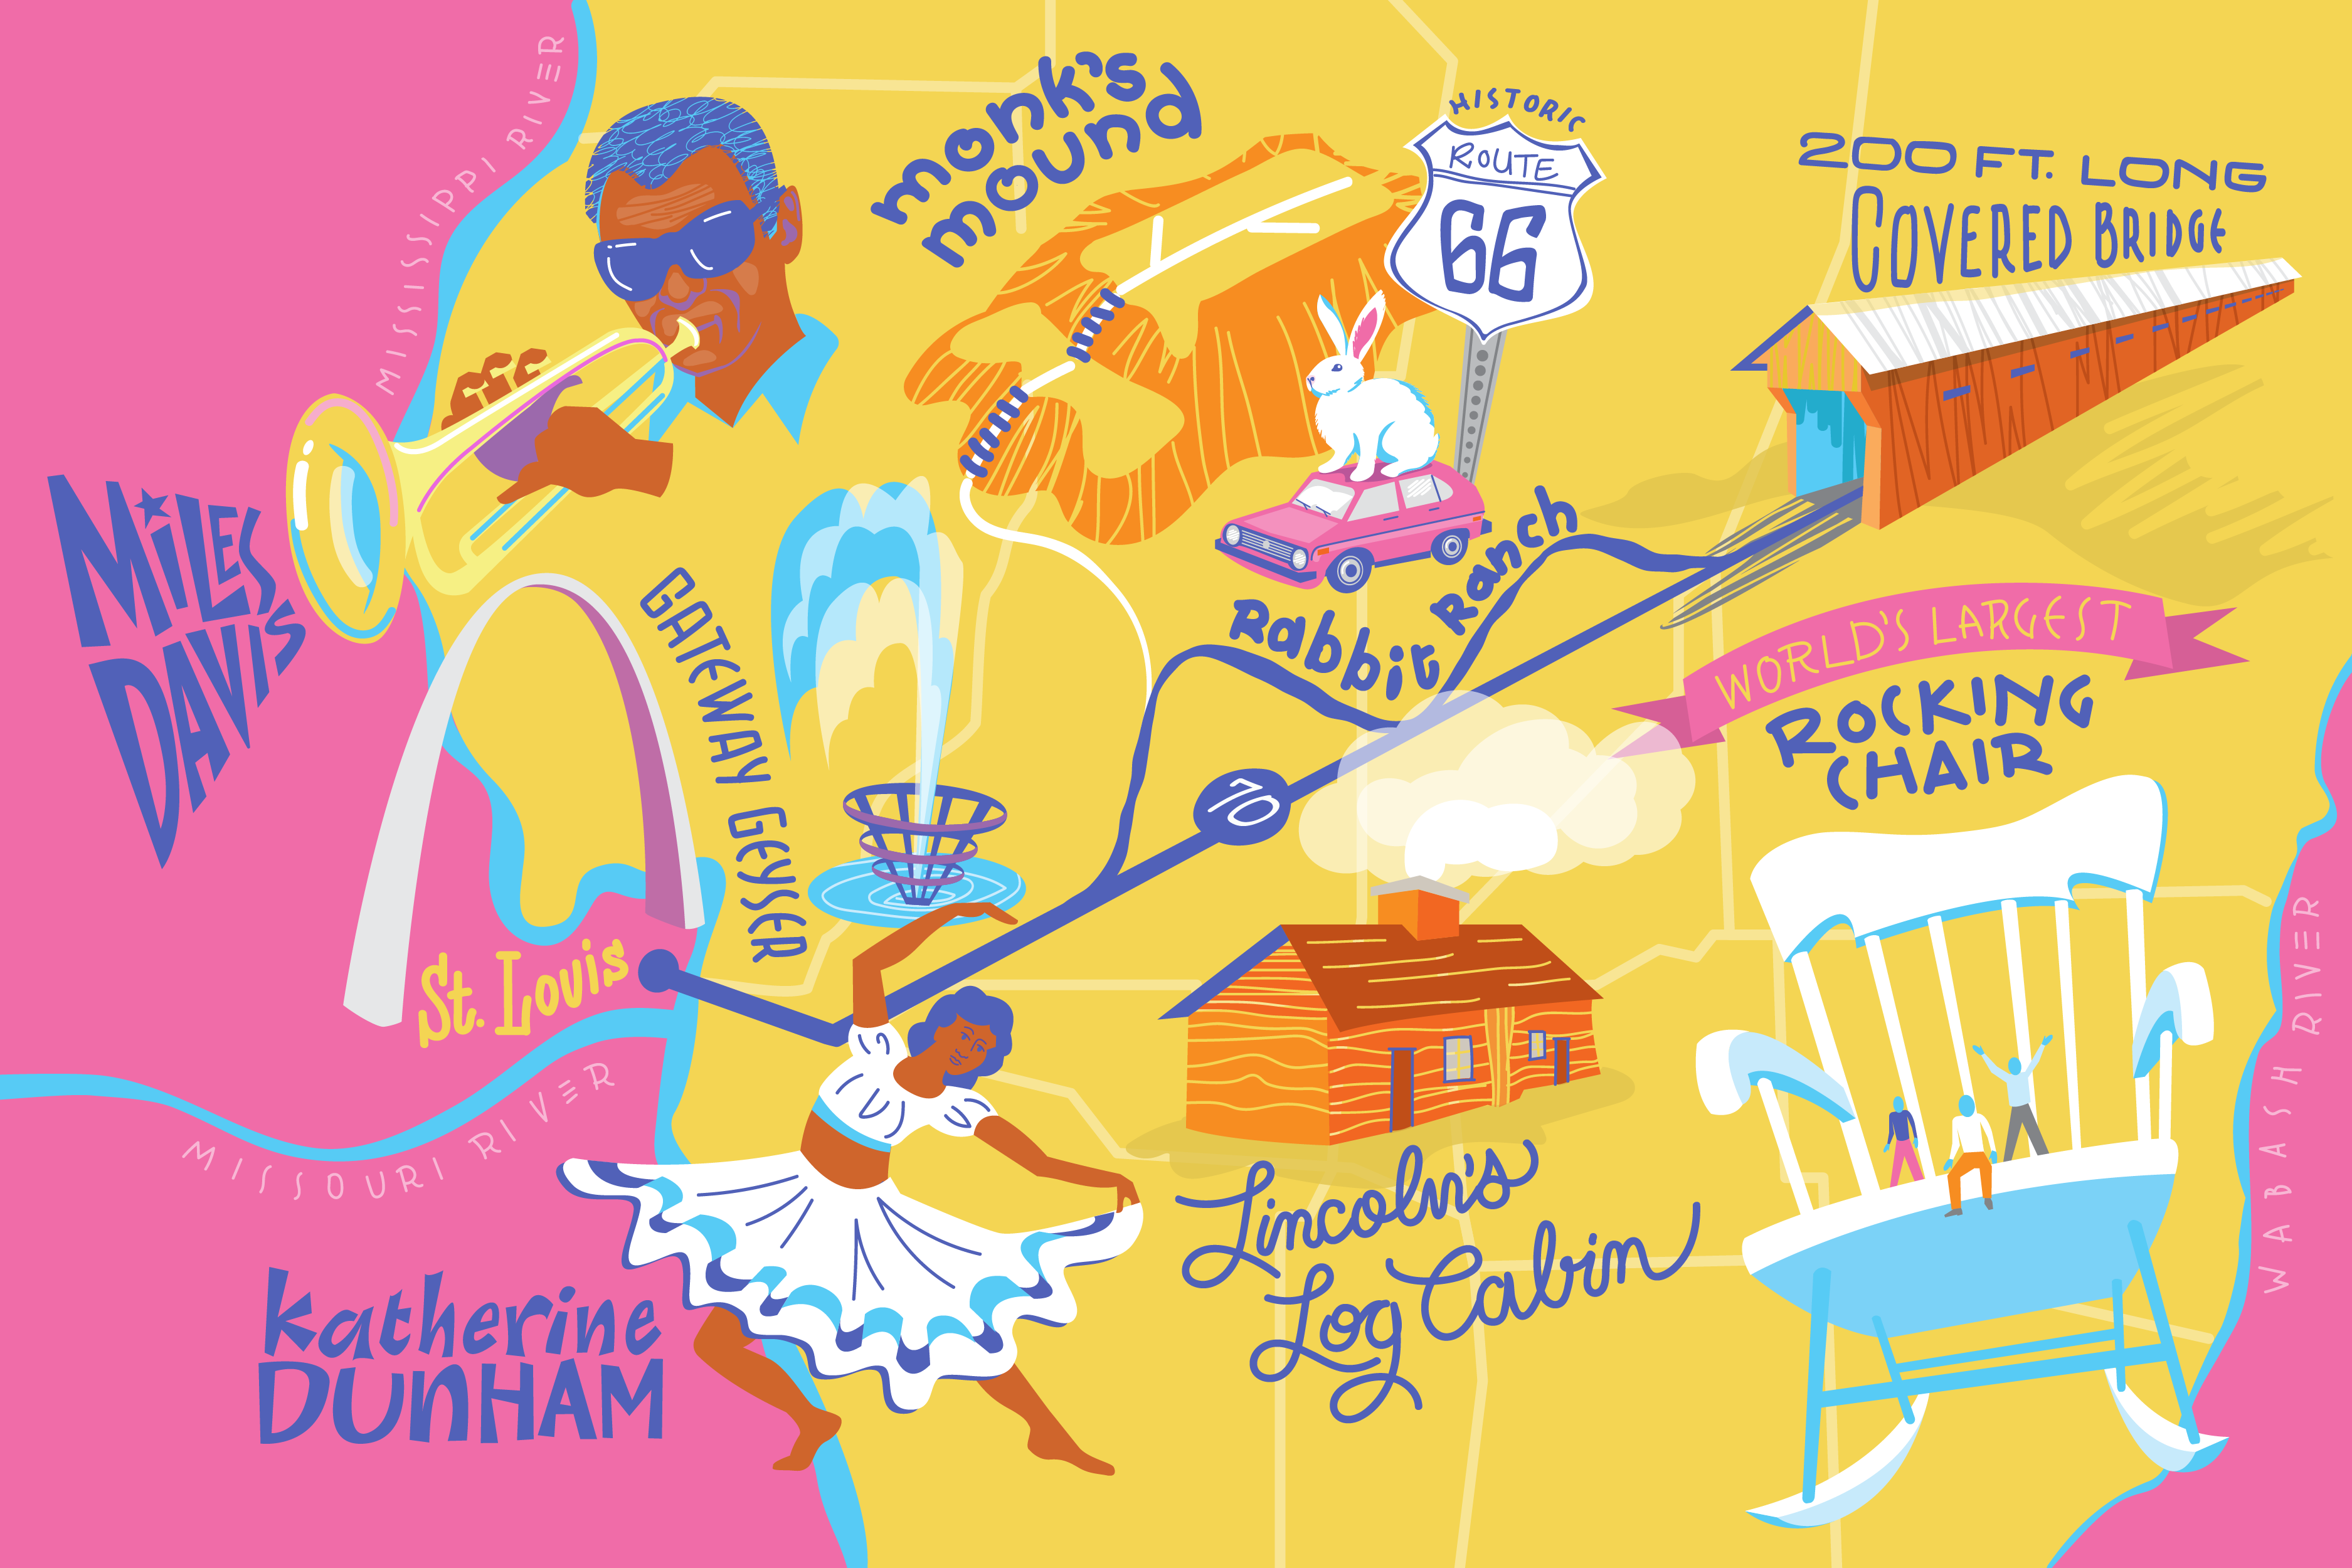 Illustration featuring highlights, landmarks, and notable people of southern Illinois.